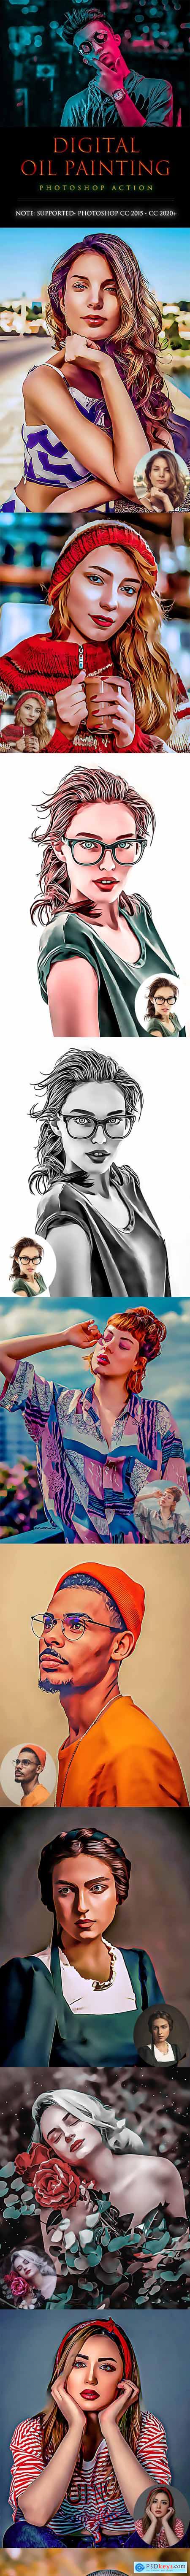 Digital OiL painting PhotoShop Action 28368497